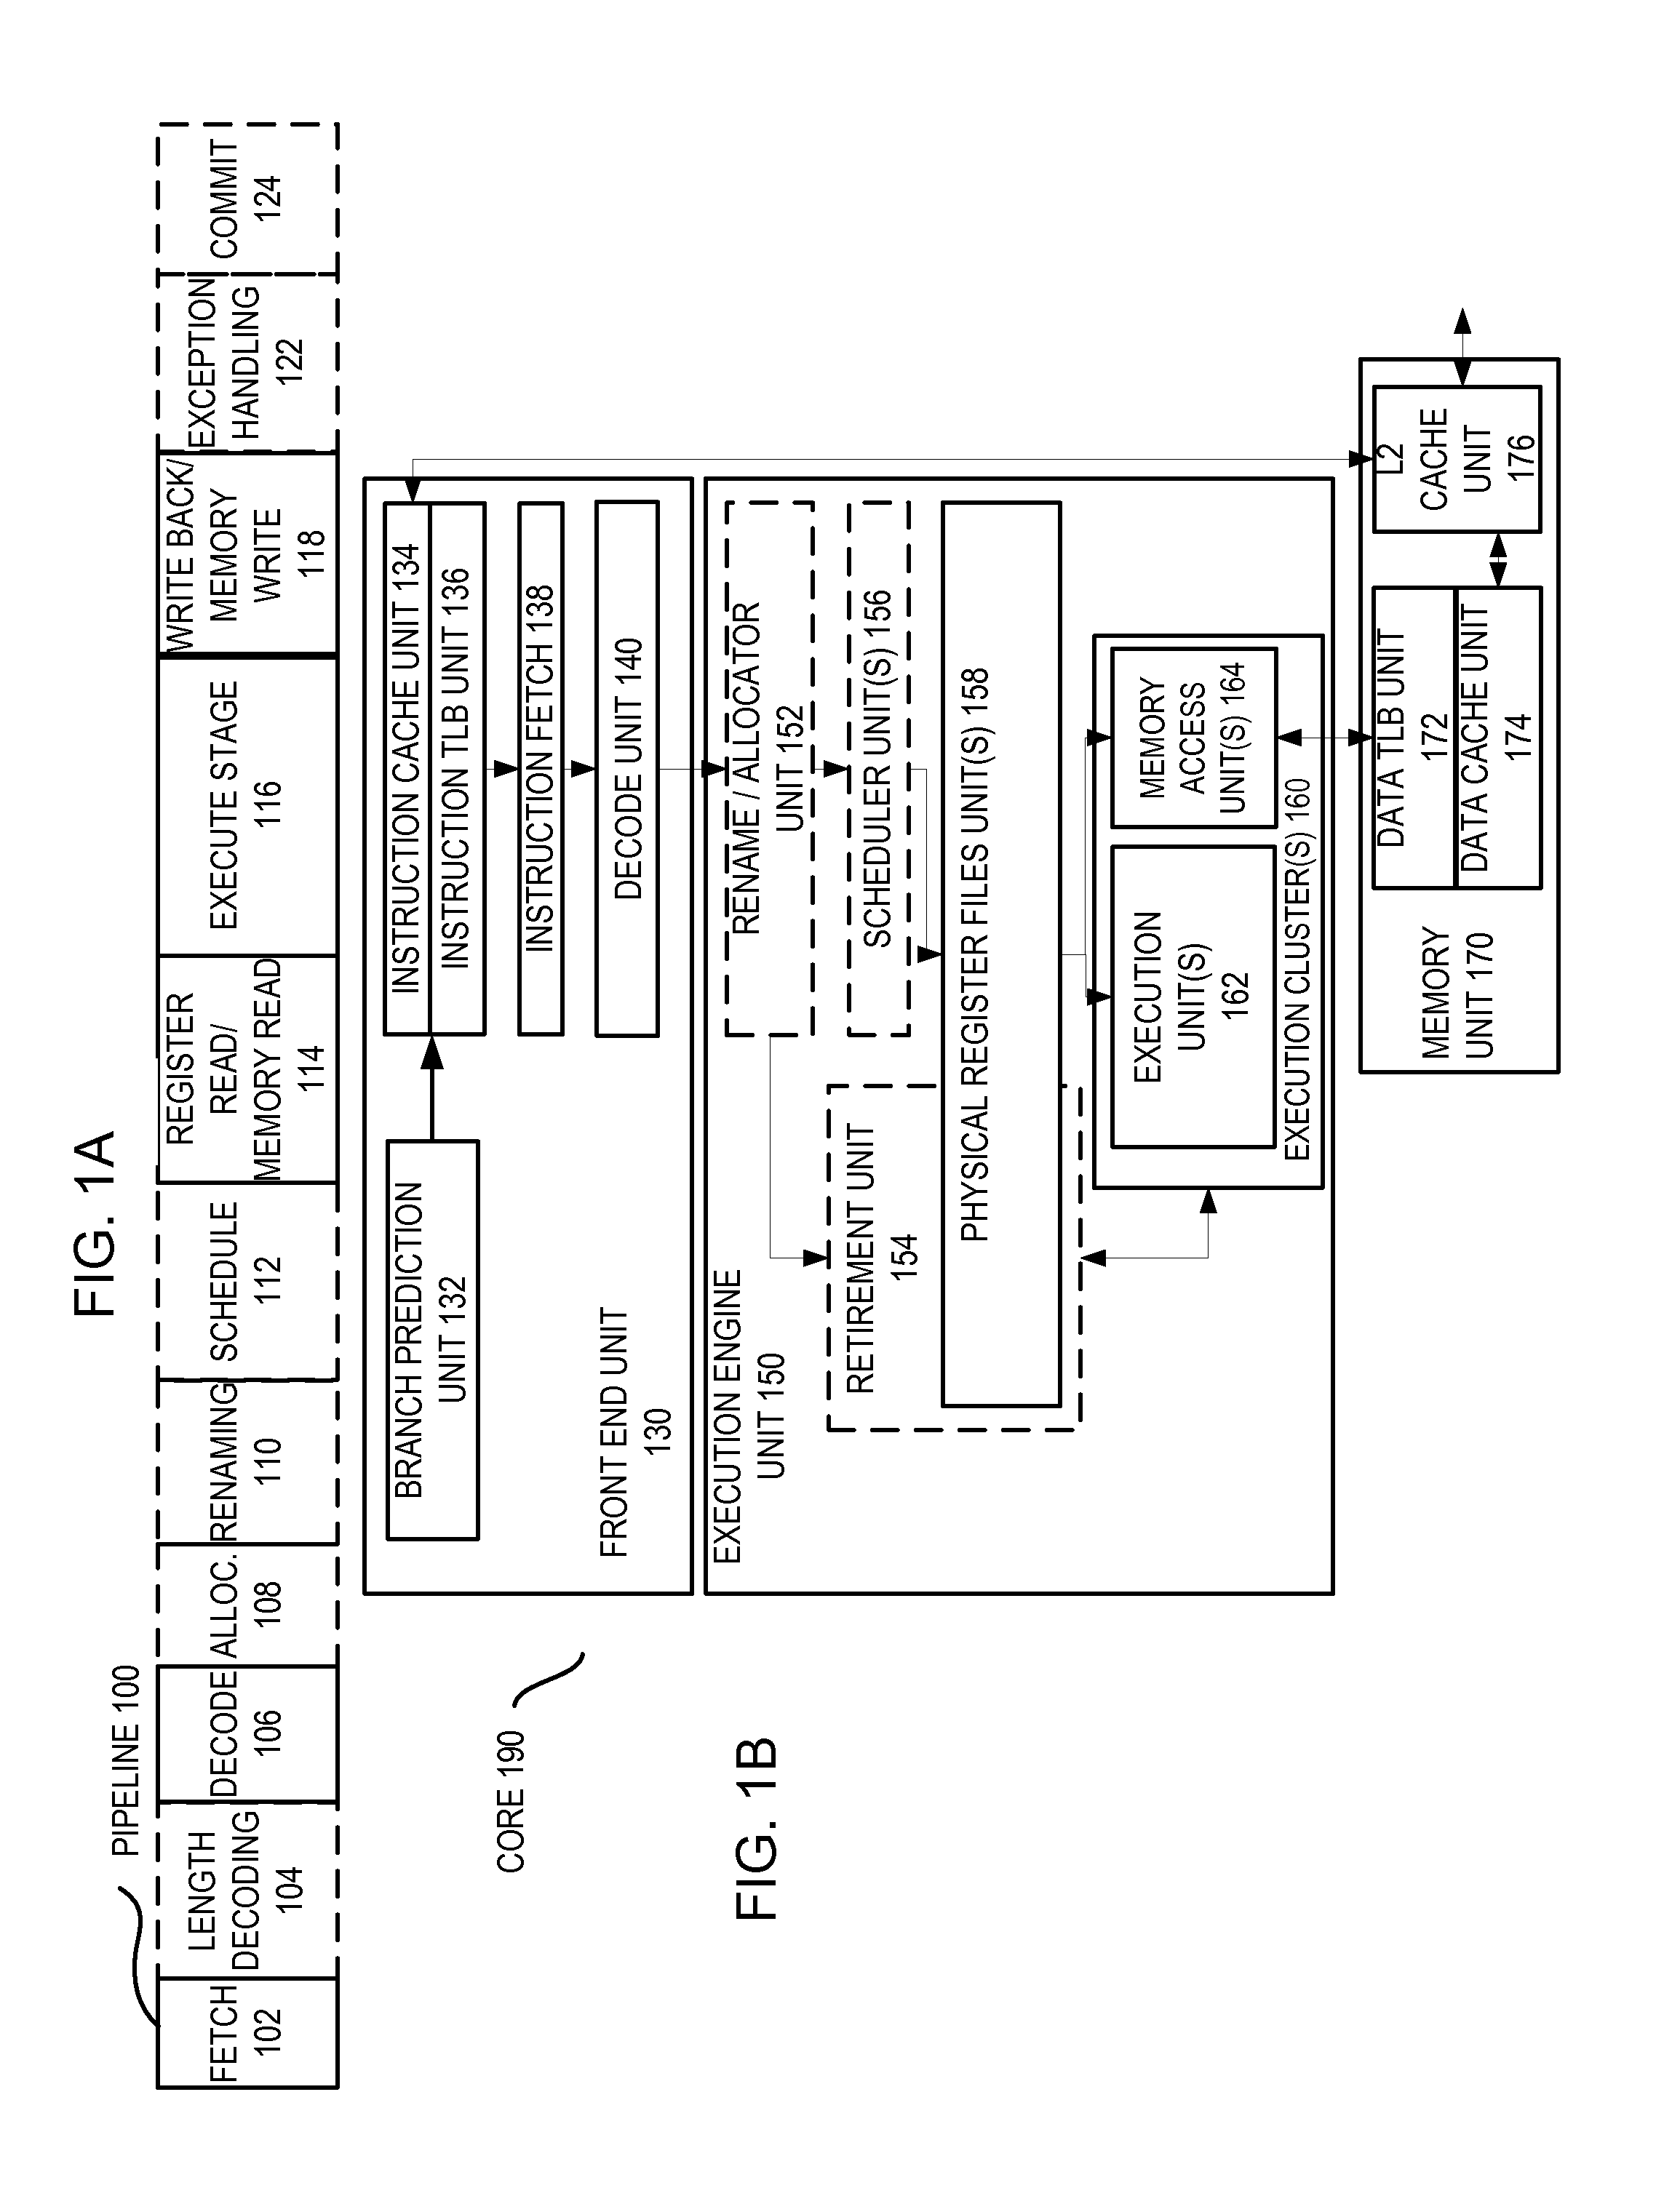 Method and apparatus for page-level monitoring